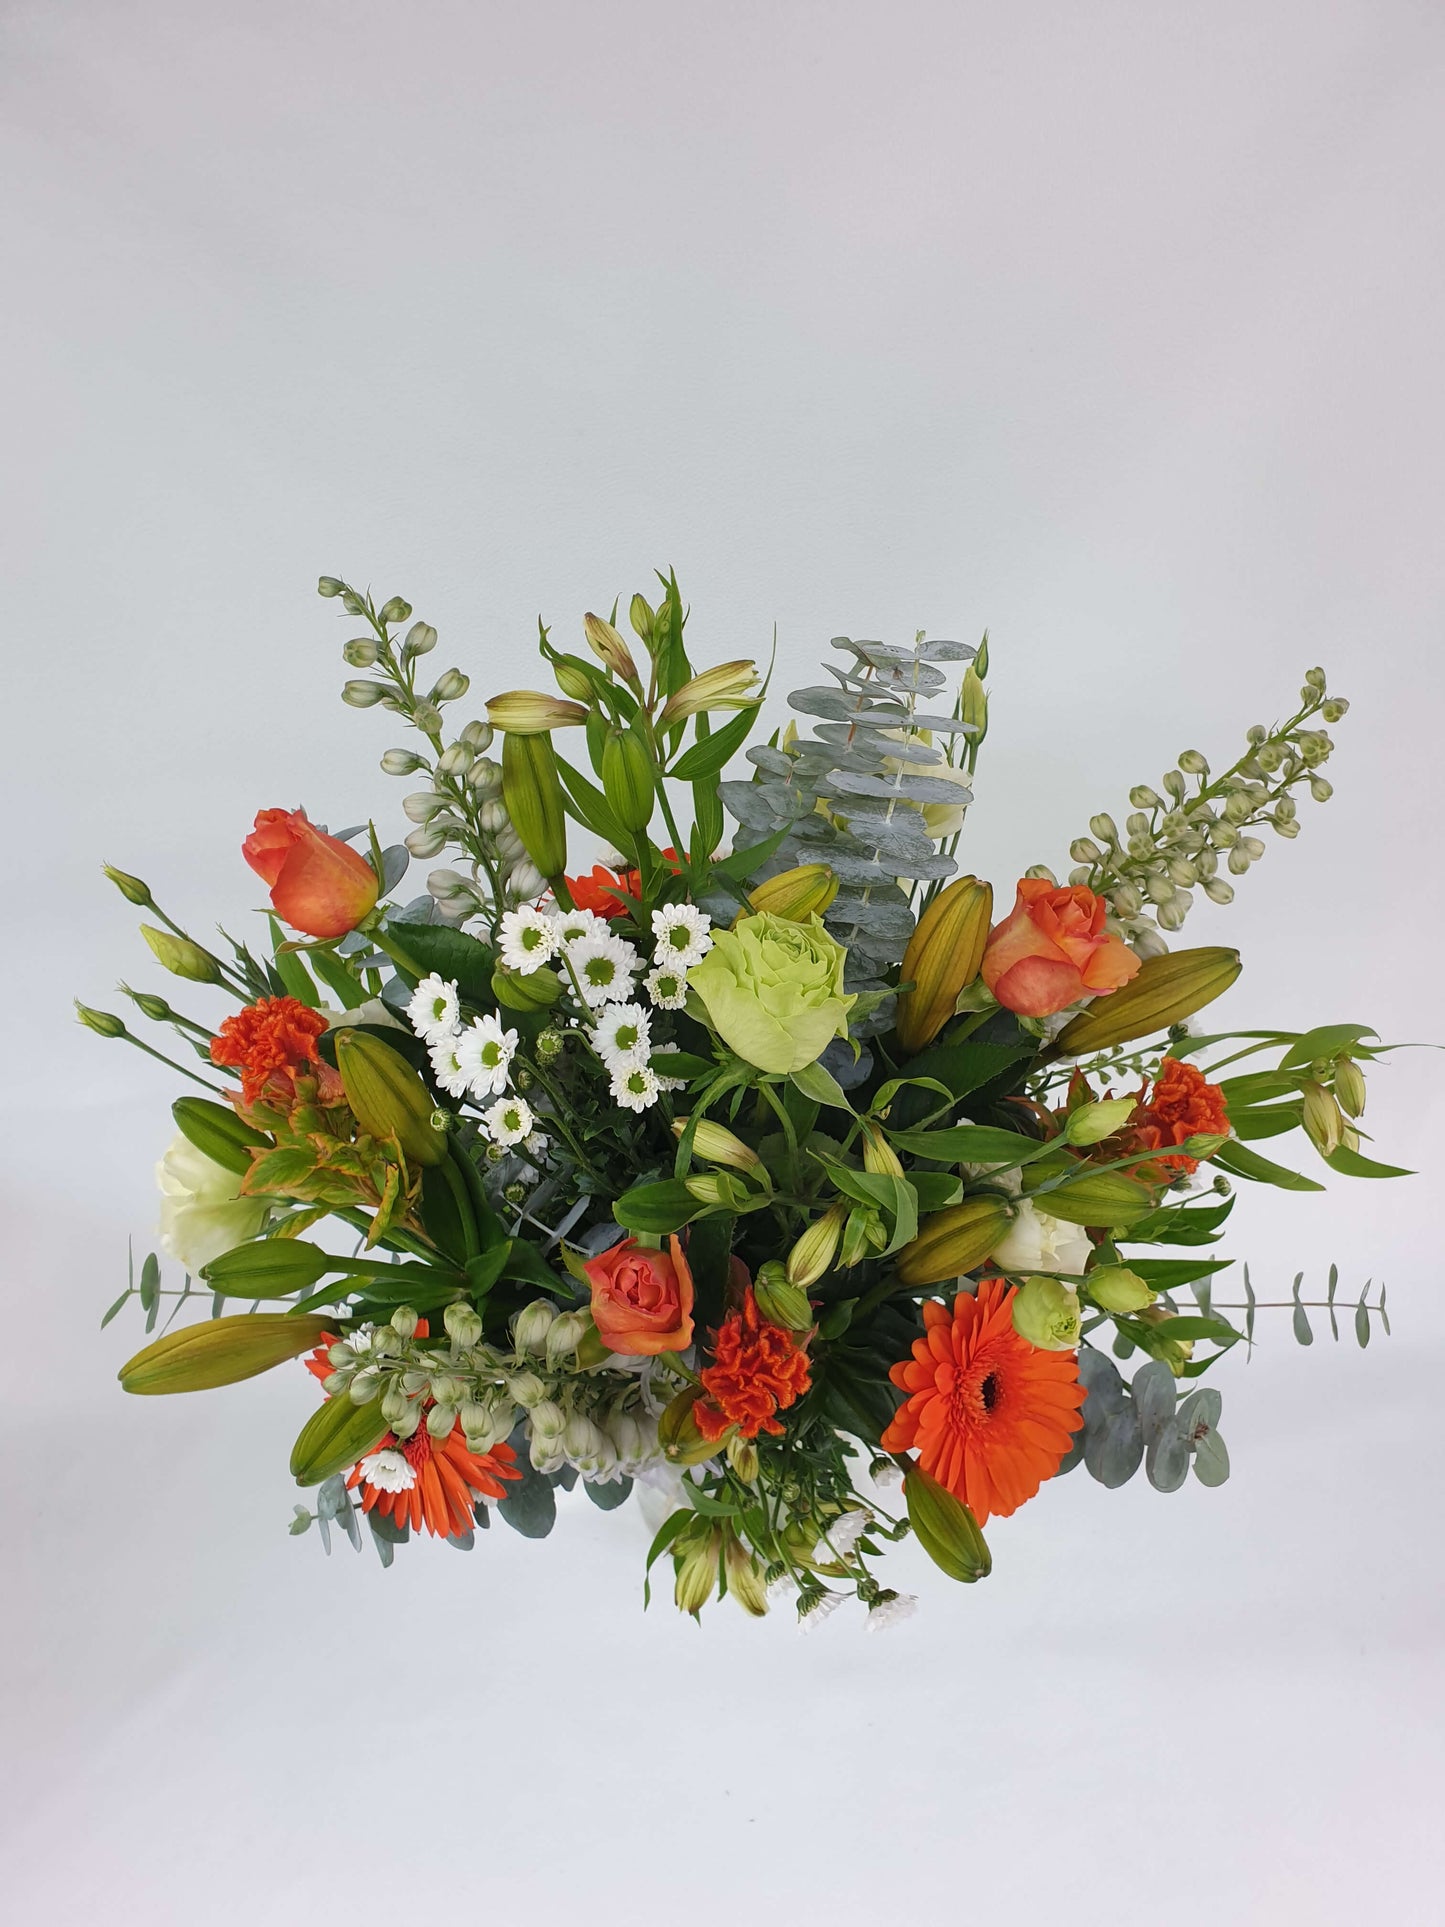 An orange, white, and green bouquet from above.